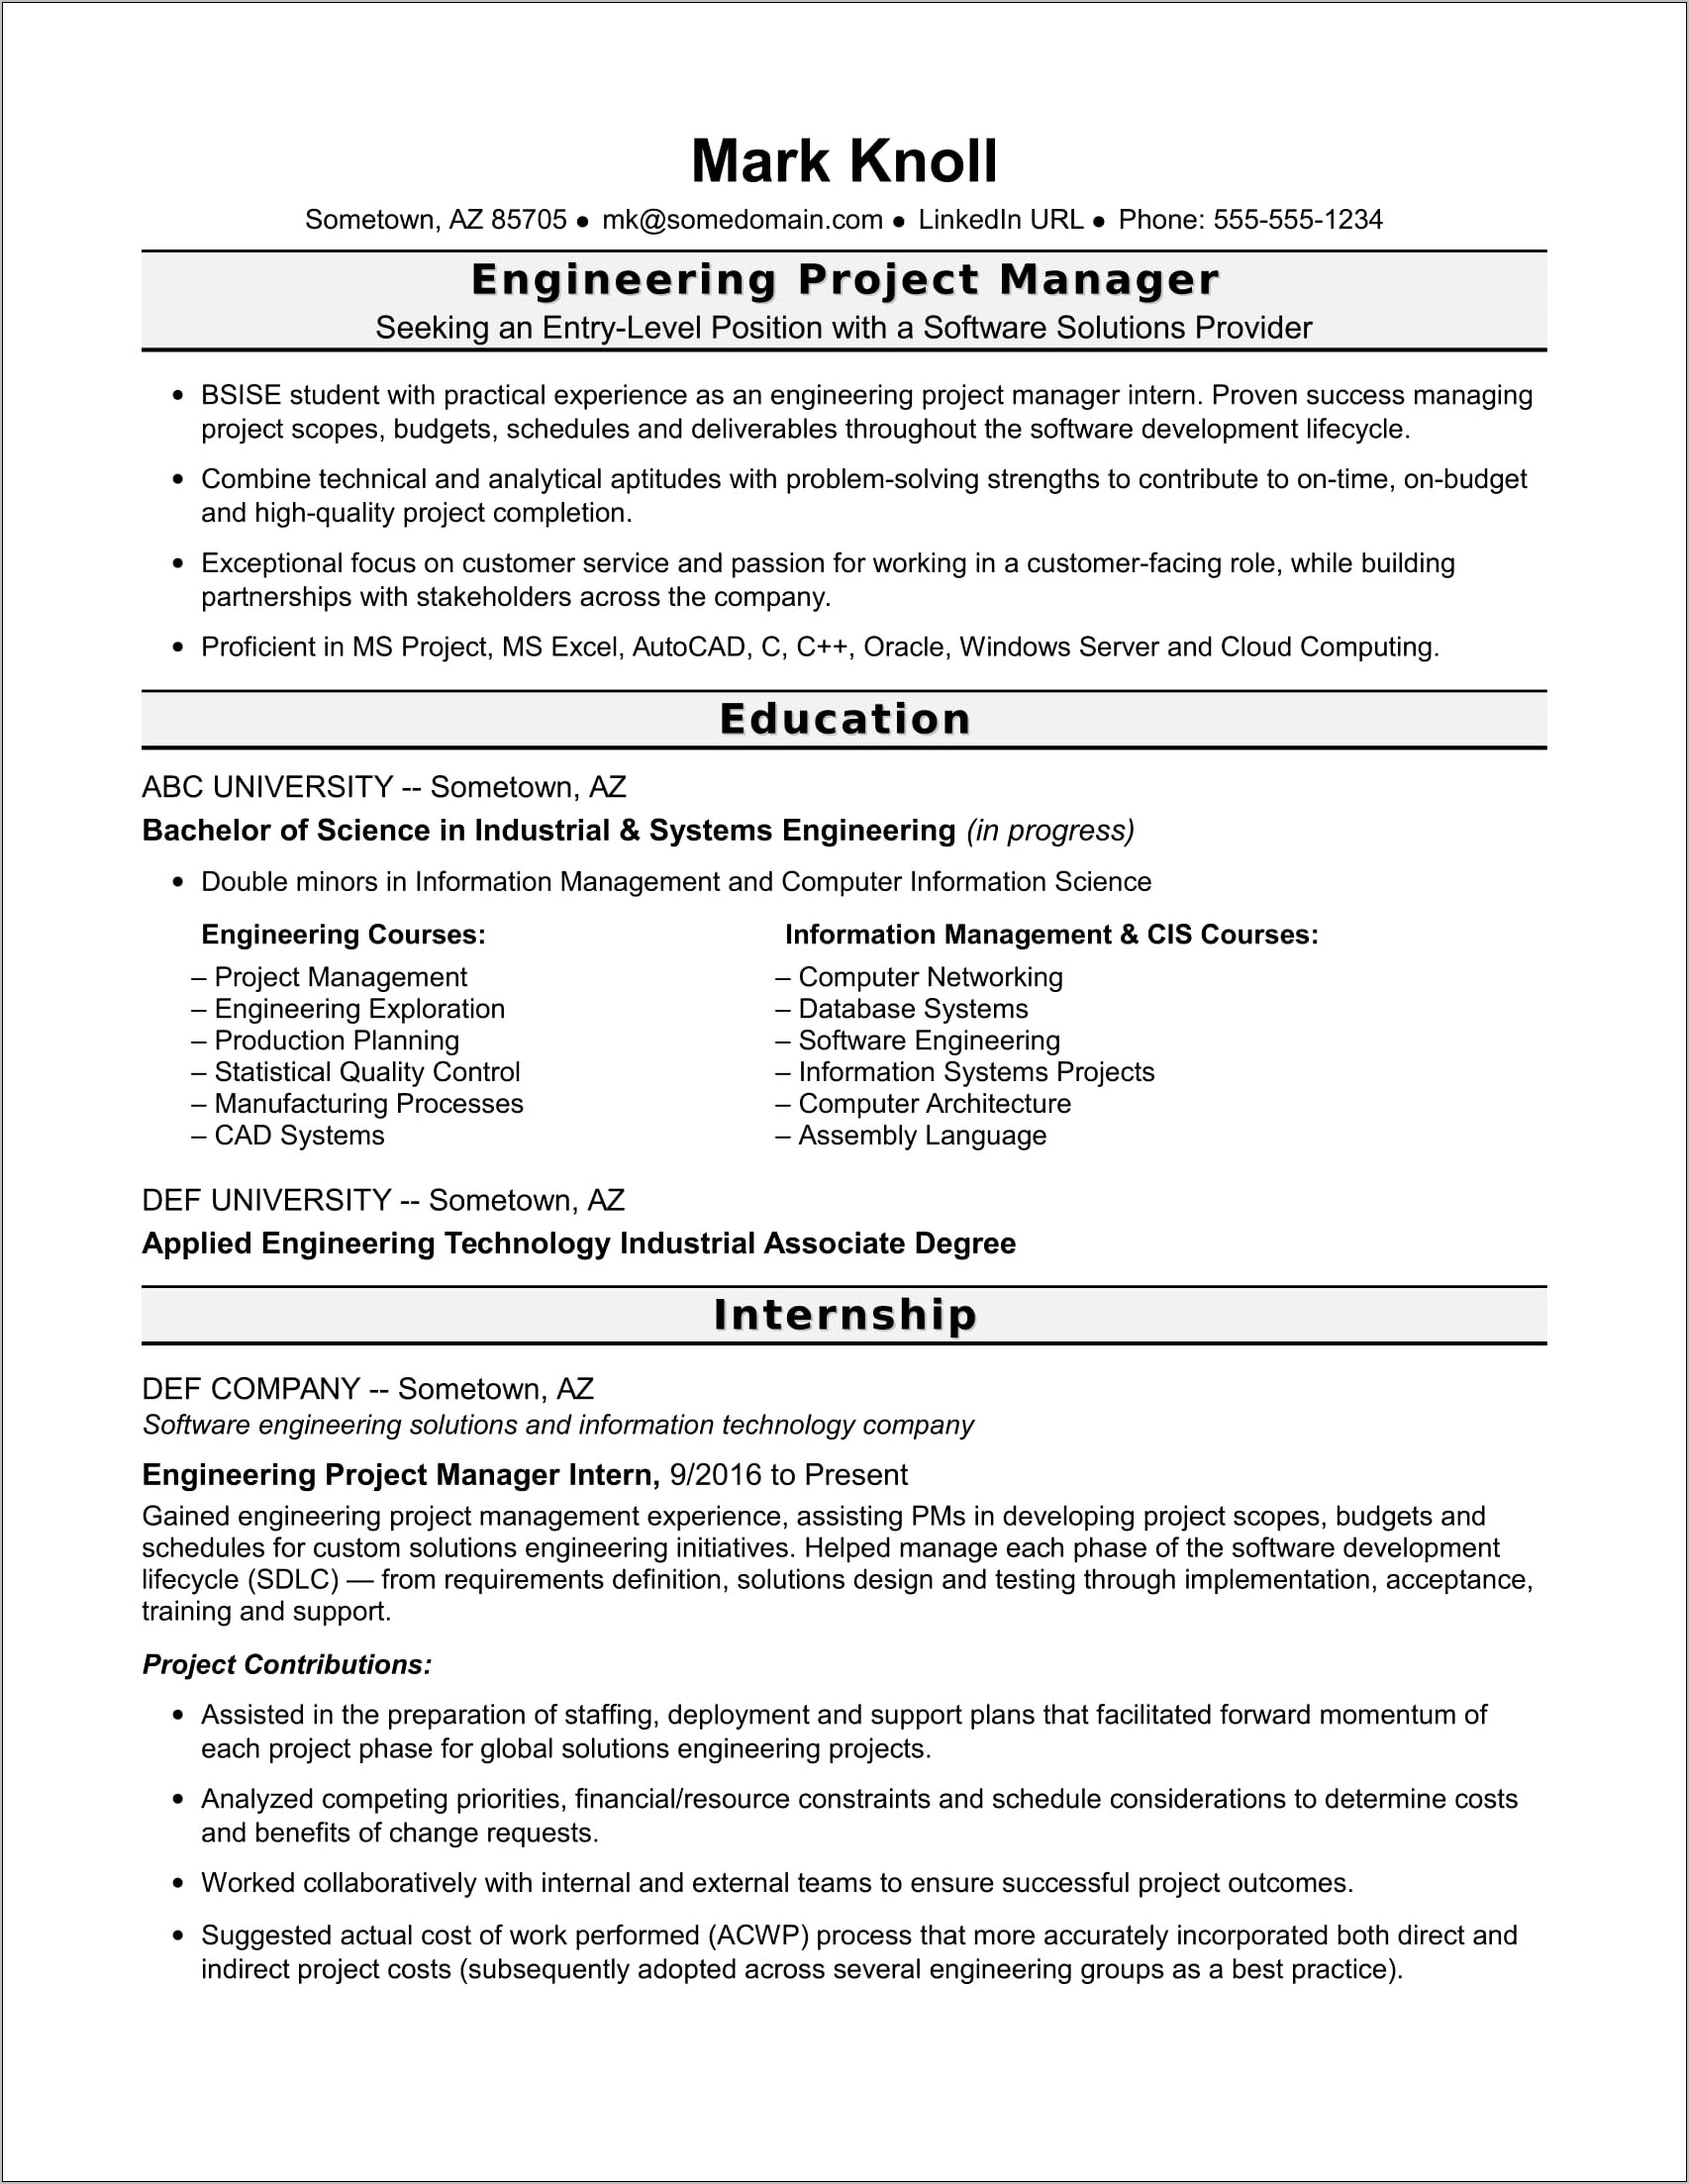 Example Resume For College Student Engineering